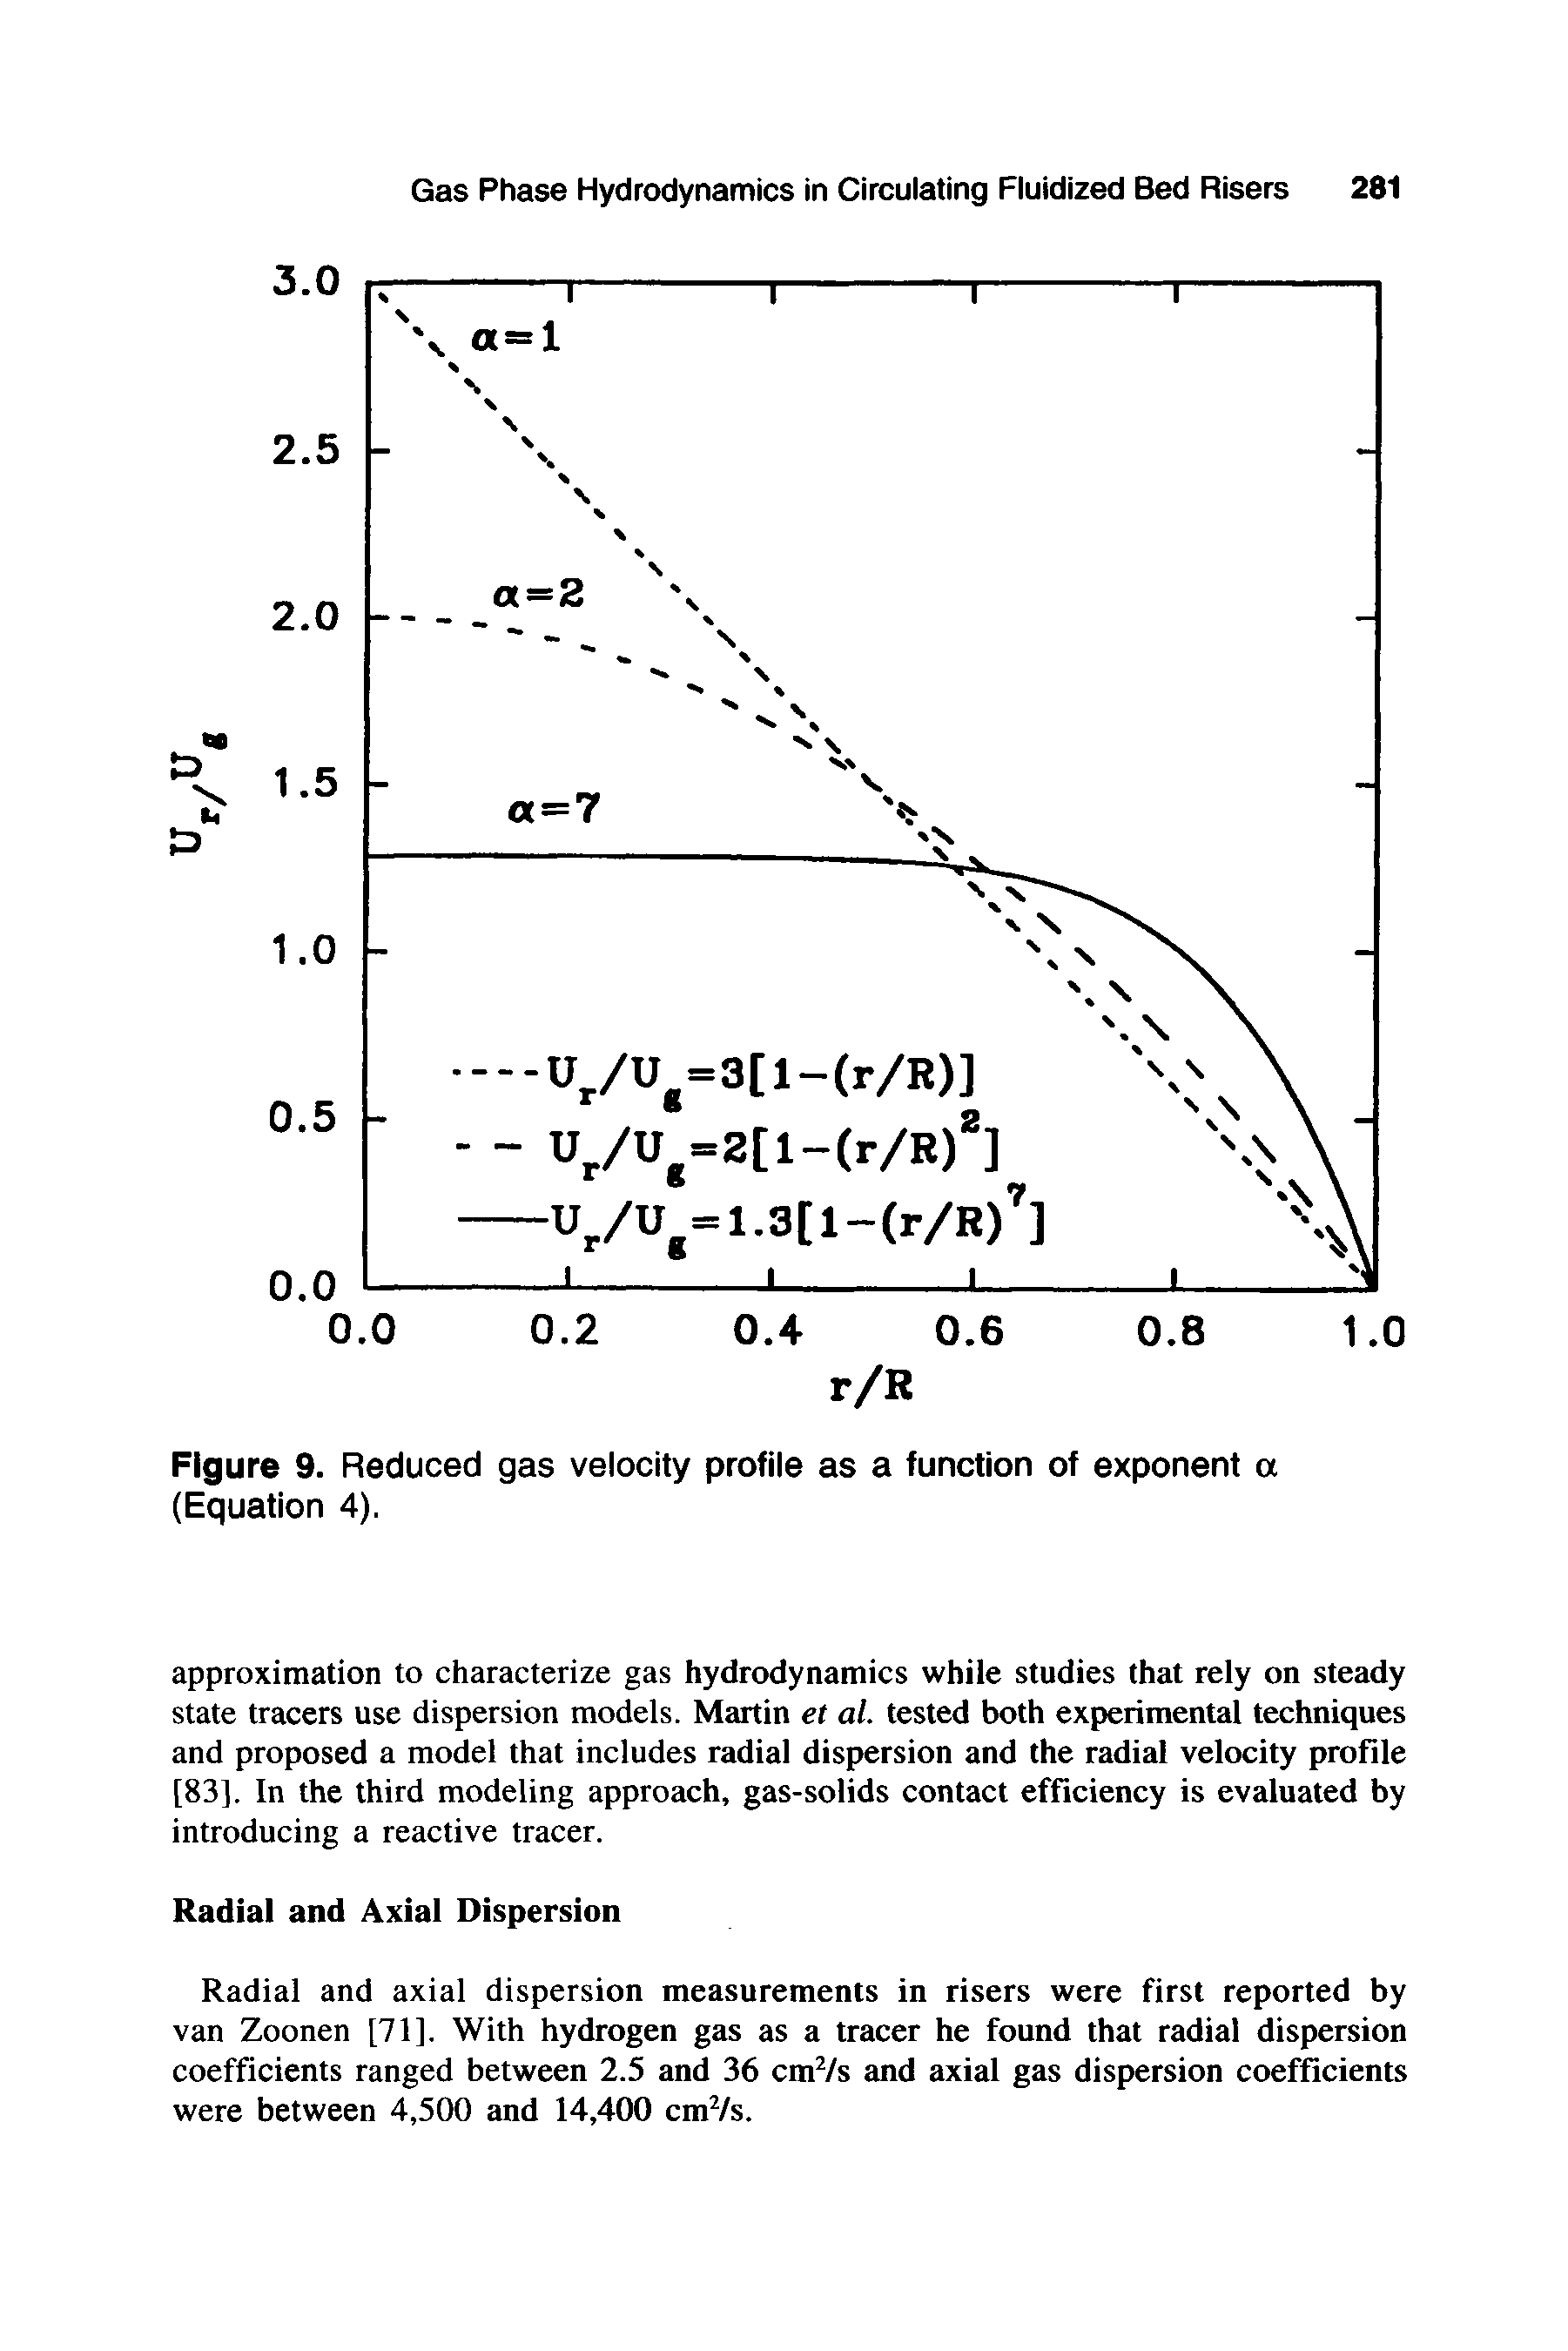 Figure 9. Reduced gas velocity profile as a function of exponent a (Equation 4).